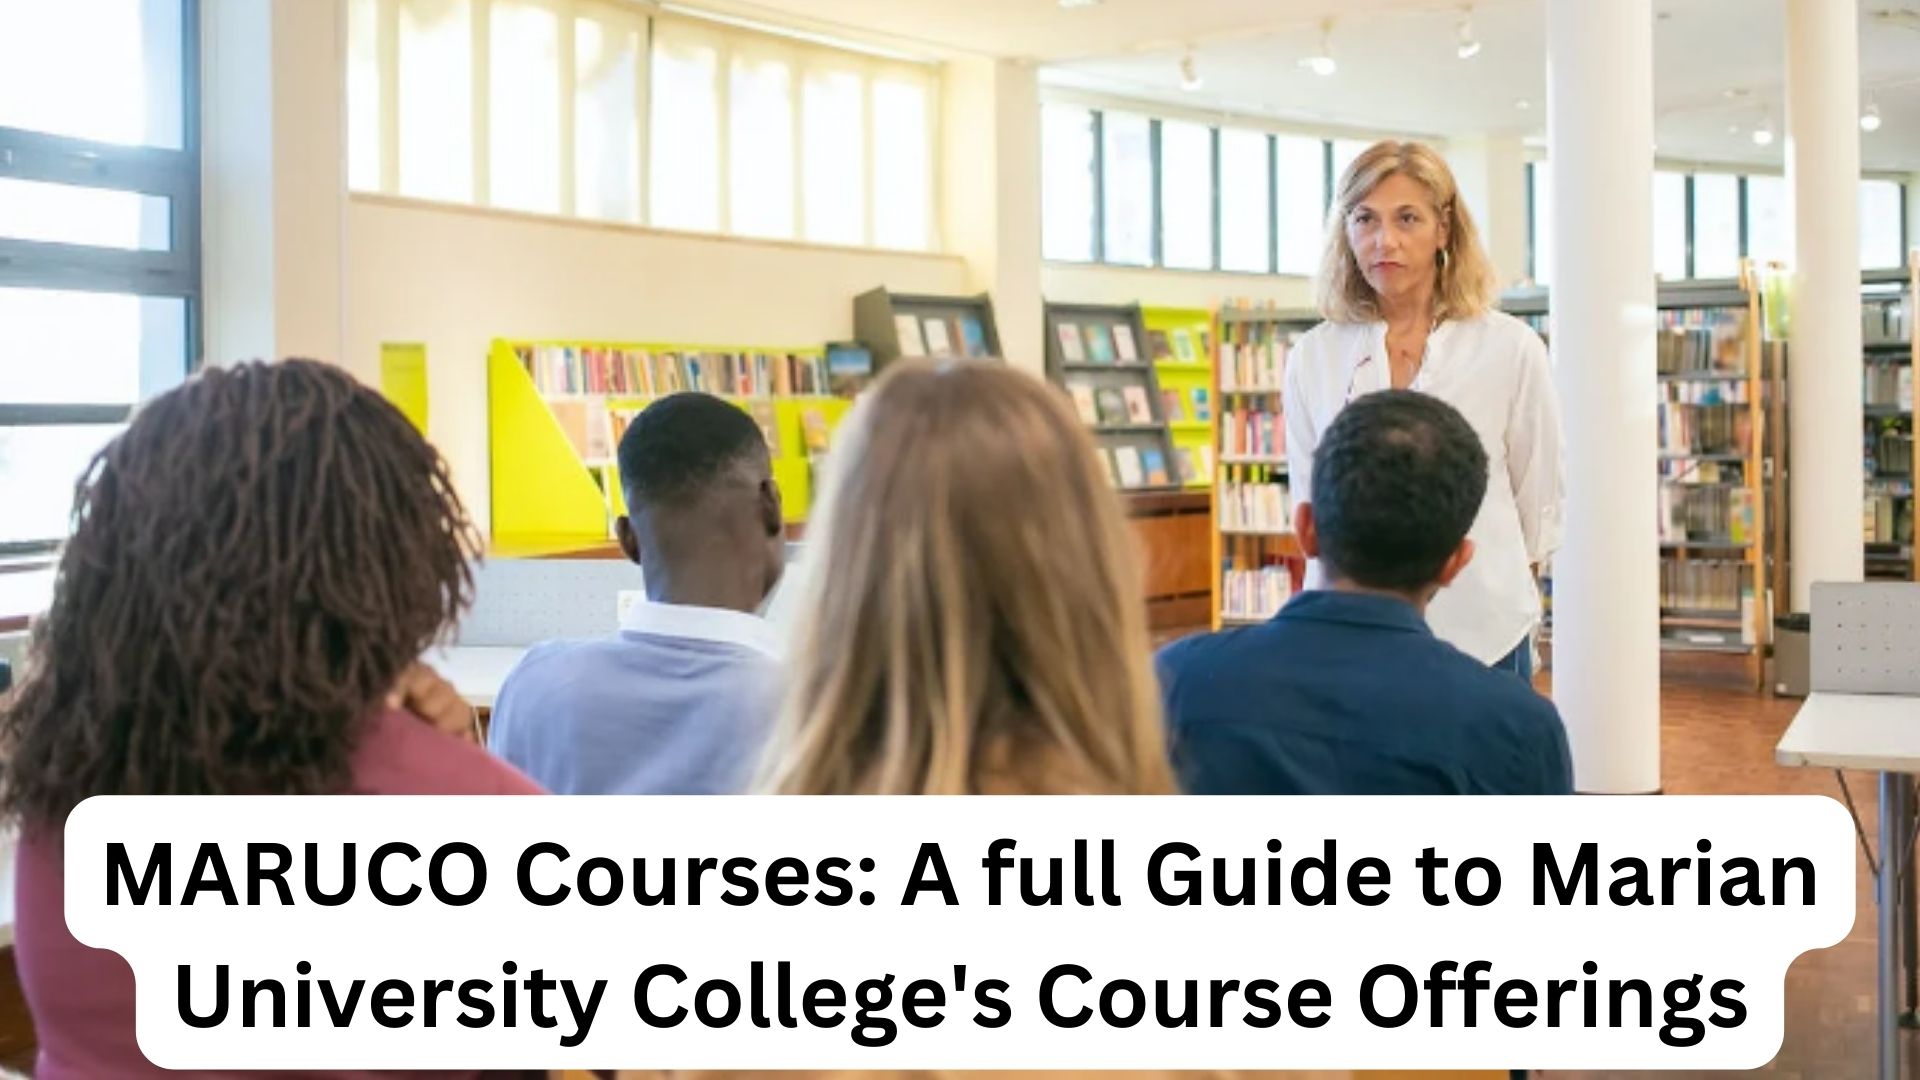 MARUCO Courses: A full Guide to Marian University College's Course Offerings